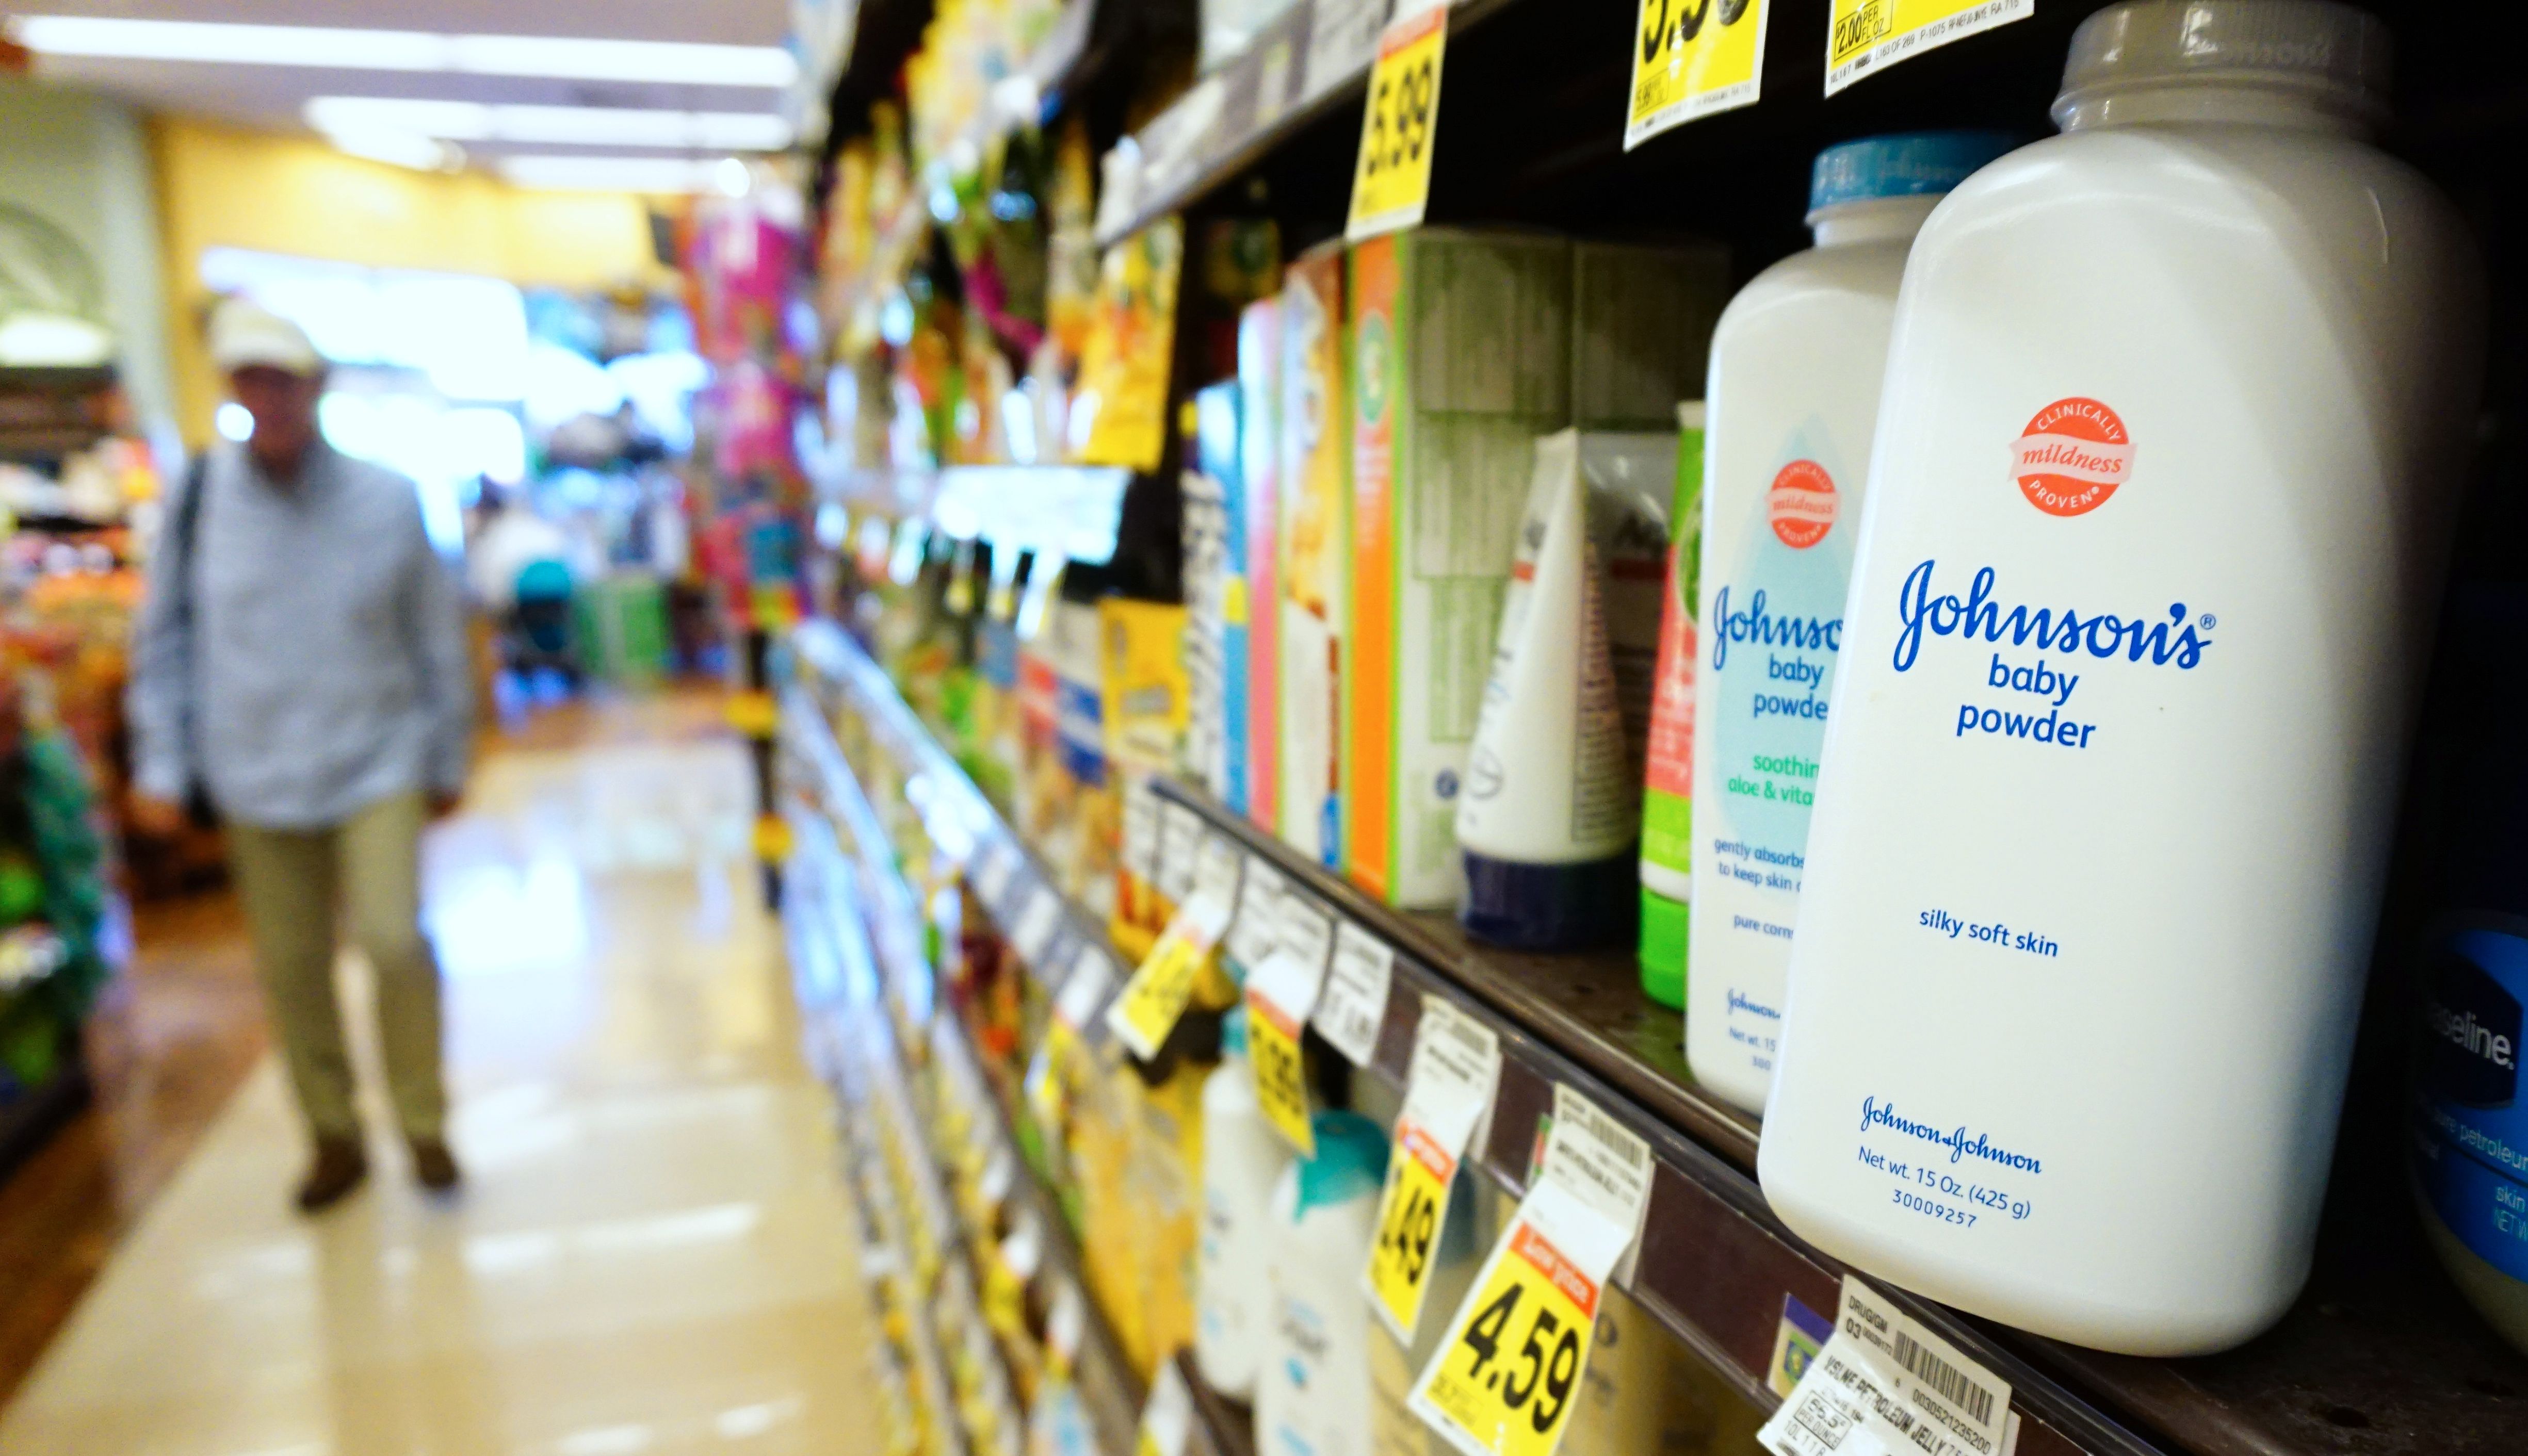 Johnson's baby powder remains stocked at a supermarket shelf on August 22, 2017 in Alhambra, California, where a Los Angeles jury on August 21 ordered Johnson & Johnson to pay a record $417 million to a woman in hospital who sued the company. A California jury on August 21, 2017 ordered drugmaker Johnson & Johnson to pay 417 million dollars to a woman who claimed she developed terminal ovarian cancer after using the company's talc-based products.The case was one of thousands of lawsuits brought nationwide alleging the company failed to warn consumers of the risk of cancer from talc in its products. (Frederic J. Brown/AFP via Getty Images)